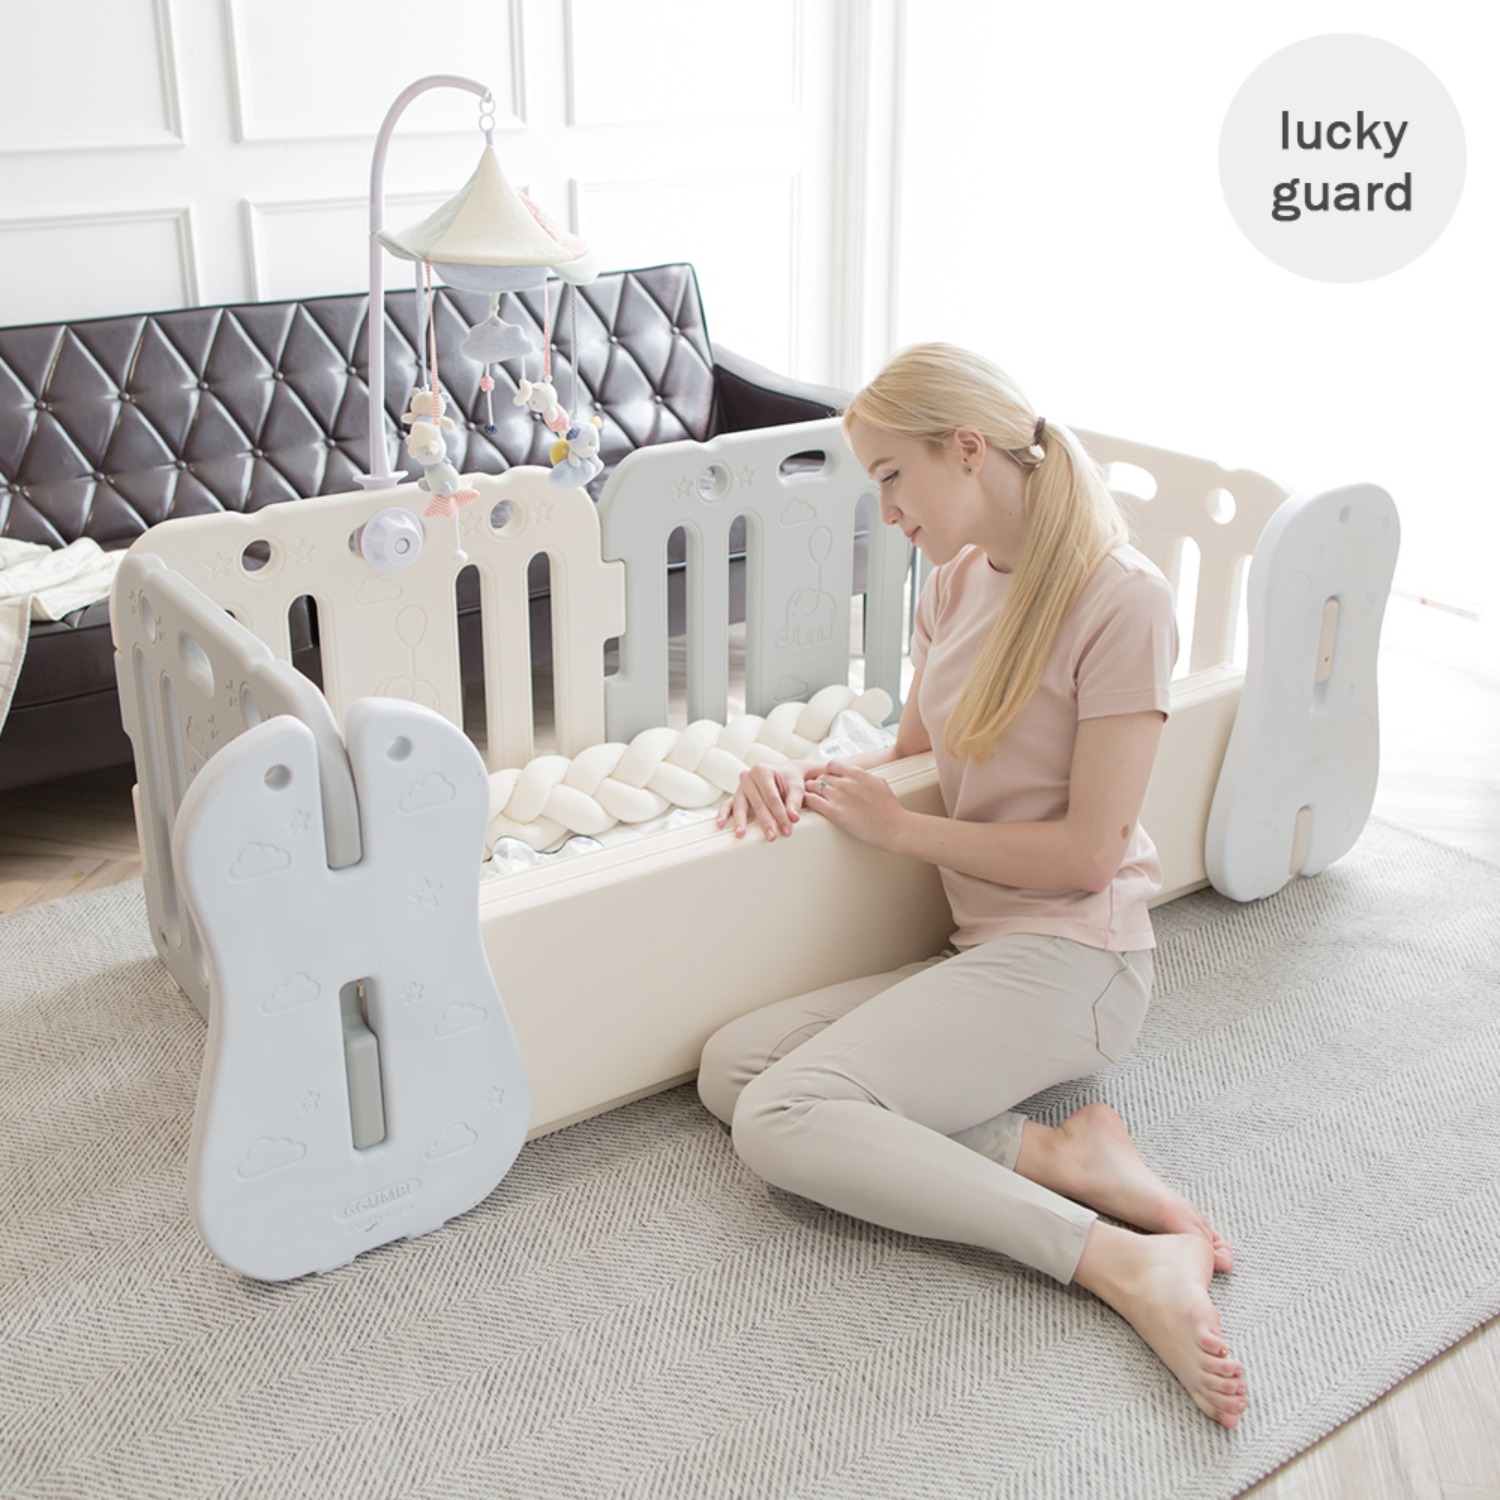 lucky guard baby room set